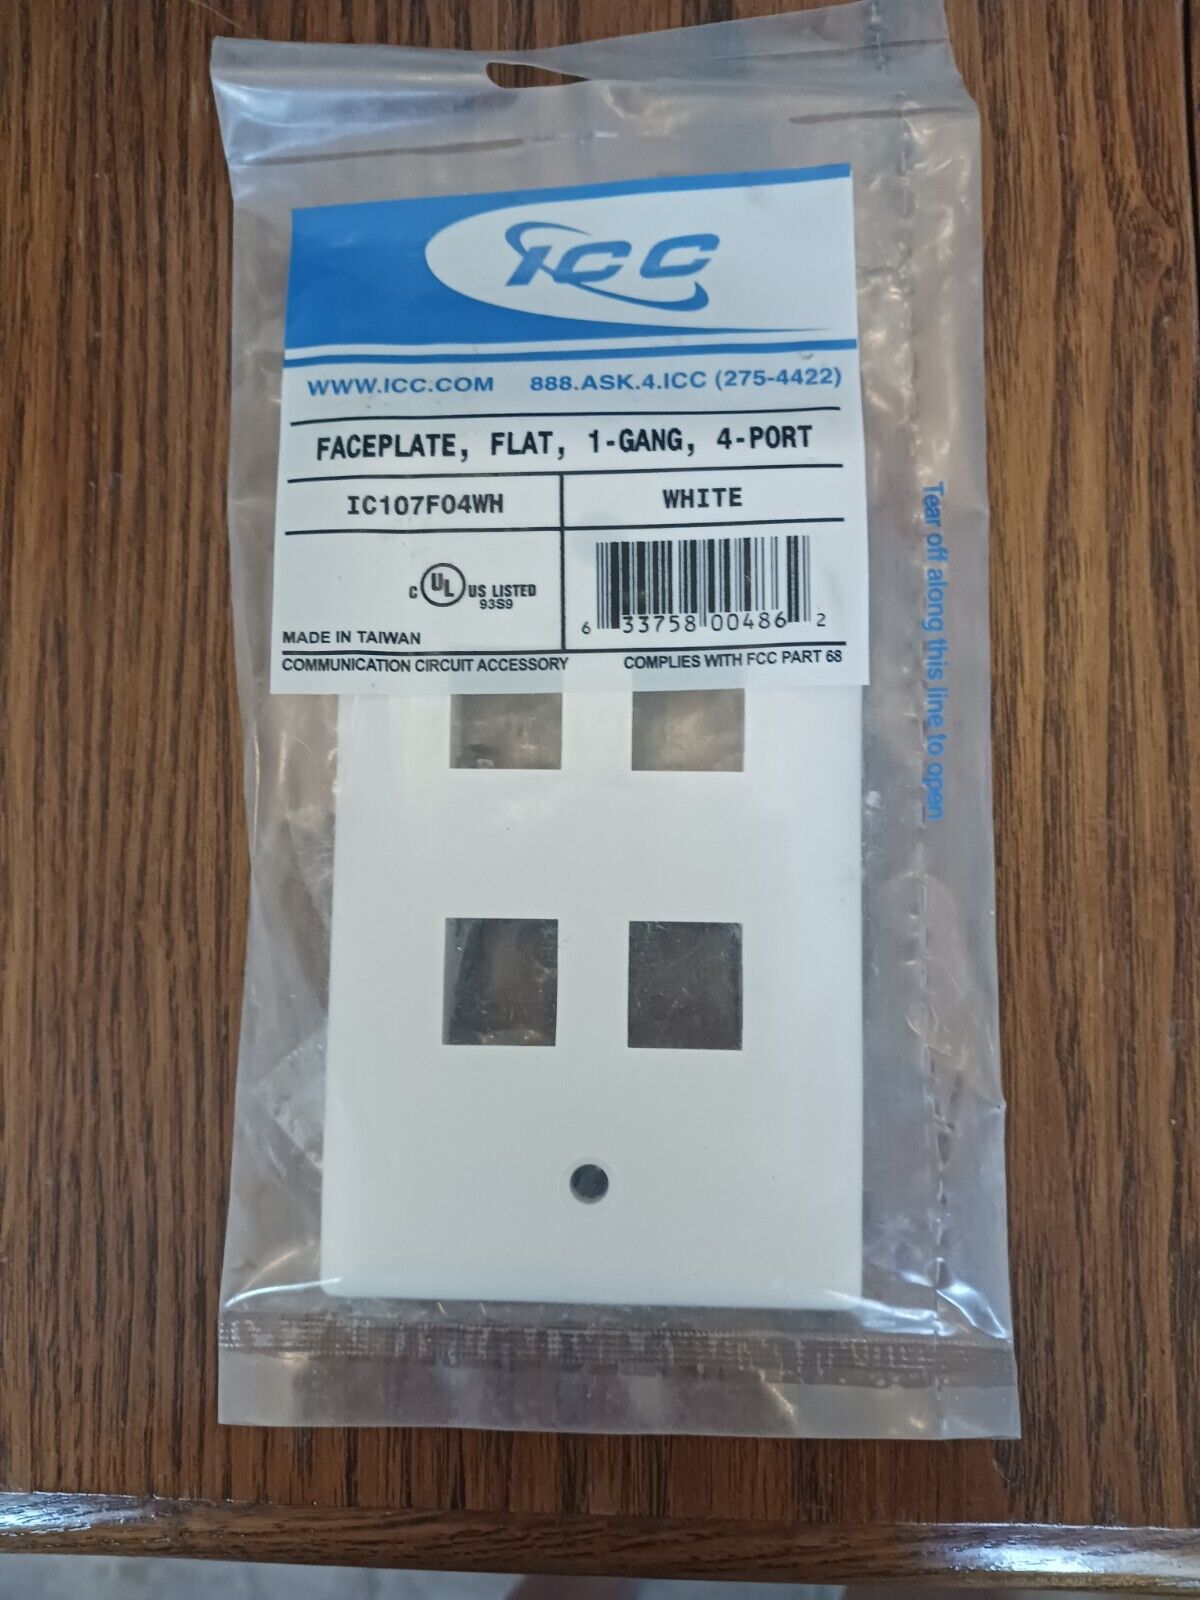 ICC IC107F04WH 1 GANG 4 PORT WHITE FACE PLATE